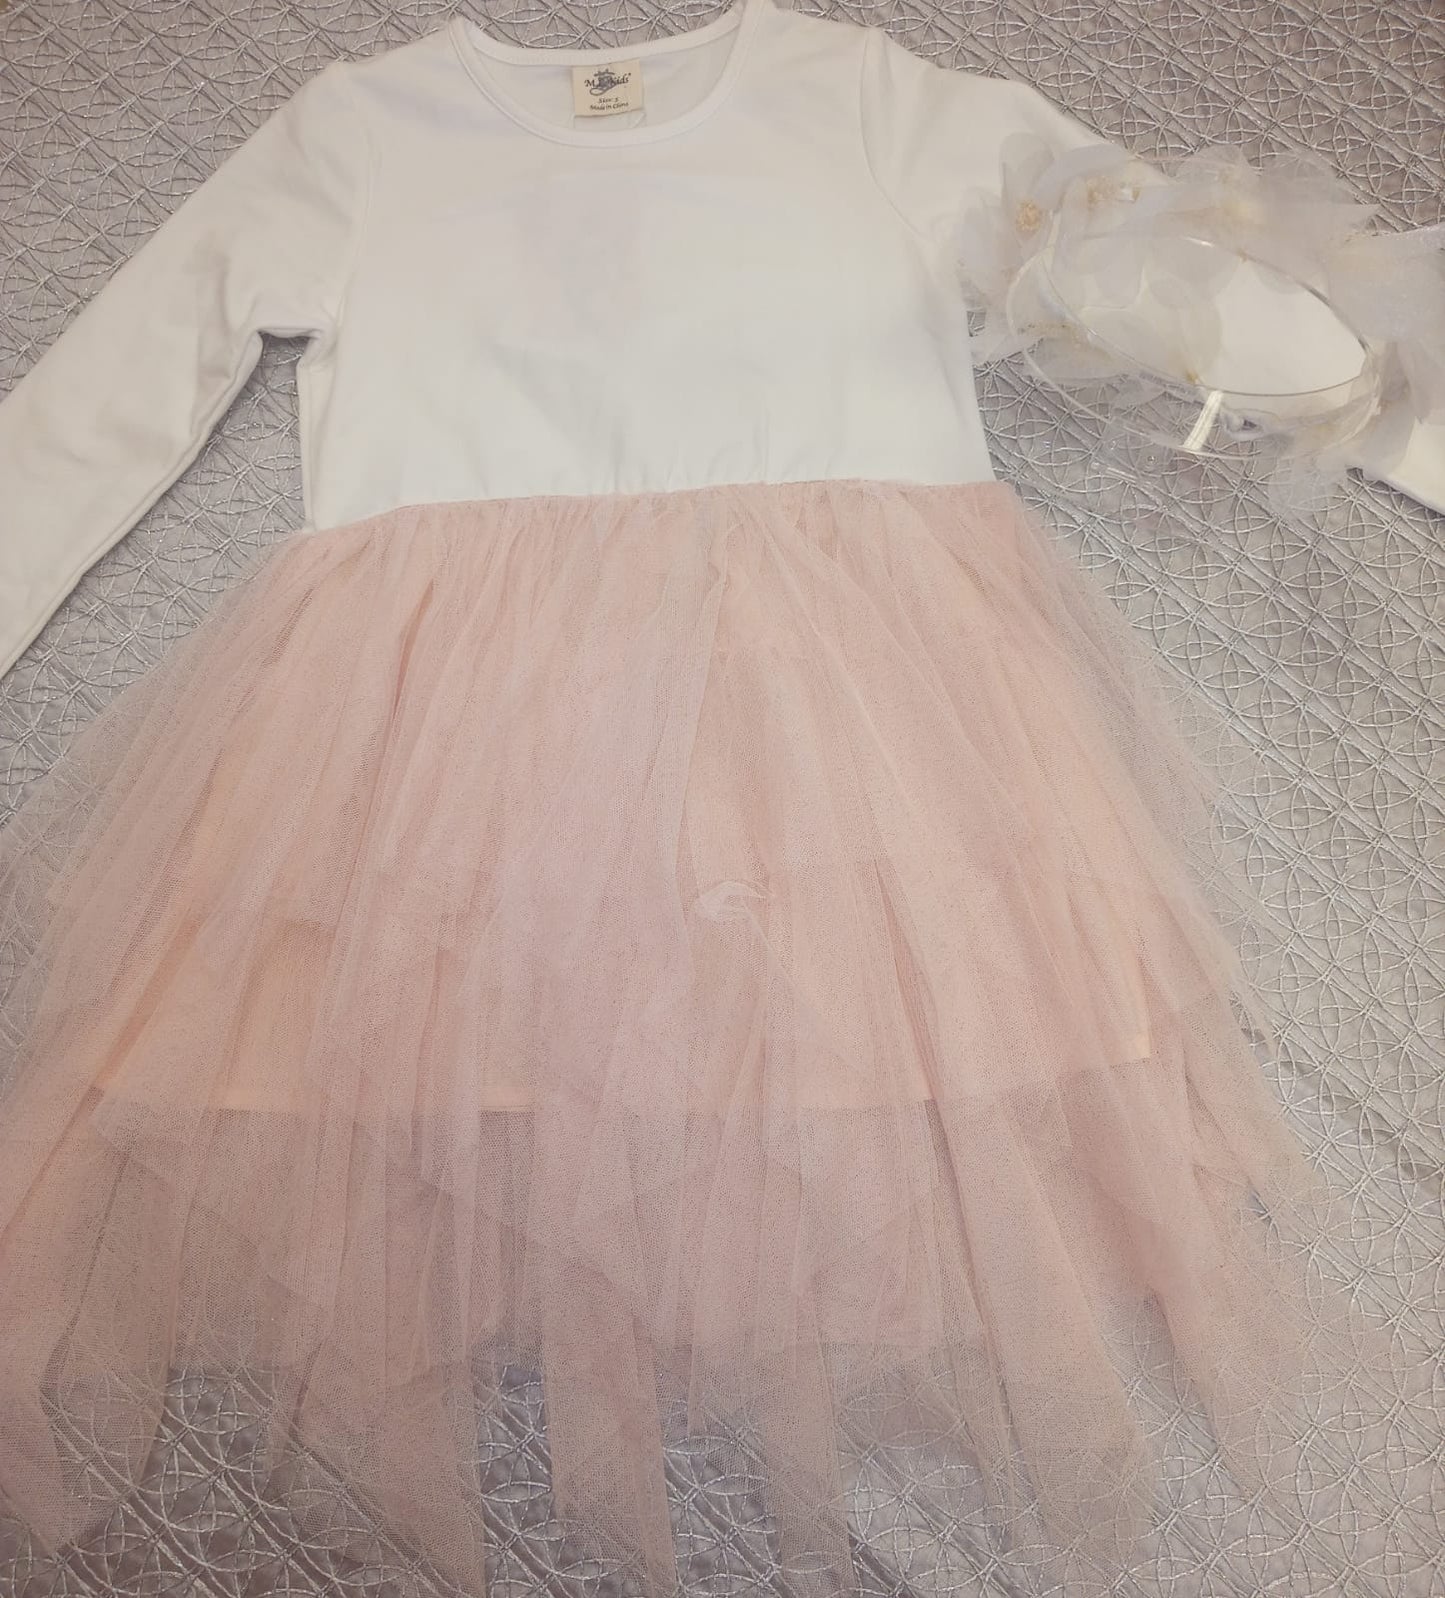 Beautiful dress in ivory and light pink